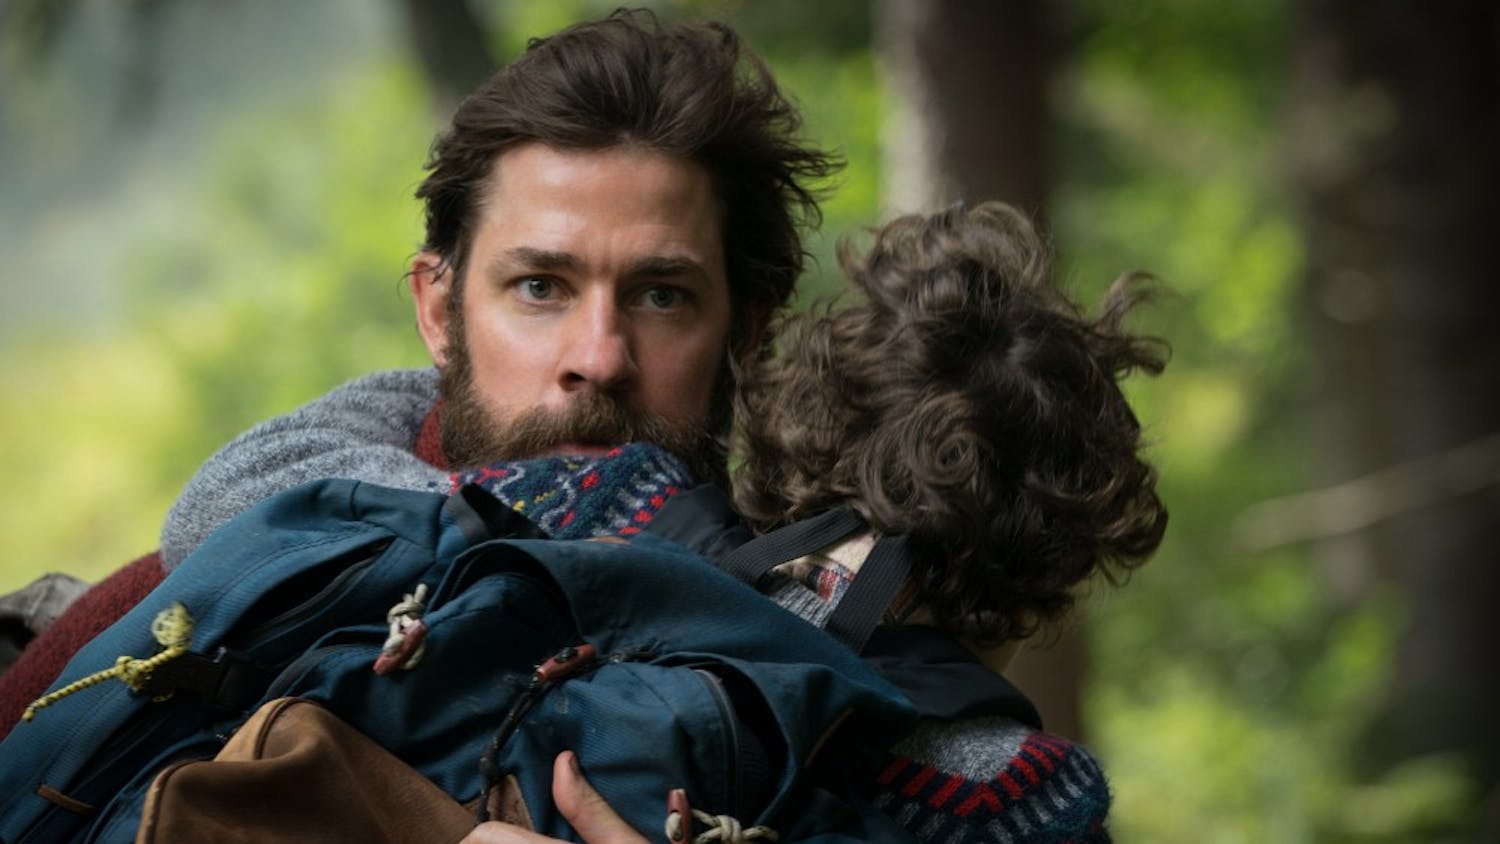 John Krasinski plays Lee Abbott and Noah Jupe plays Marcus Abbott in "A Quiet Place", from Paramount Pictures.